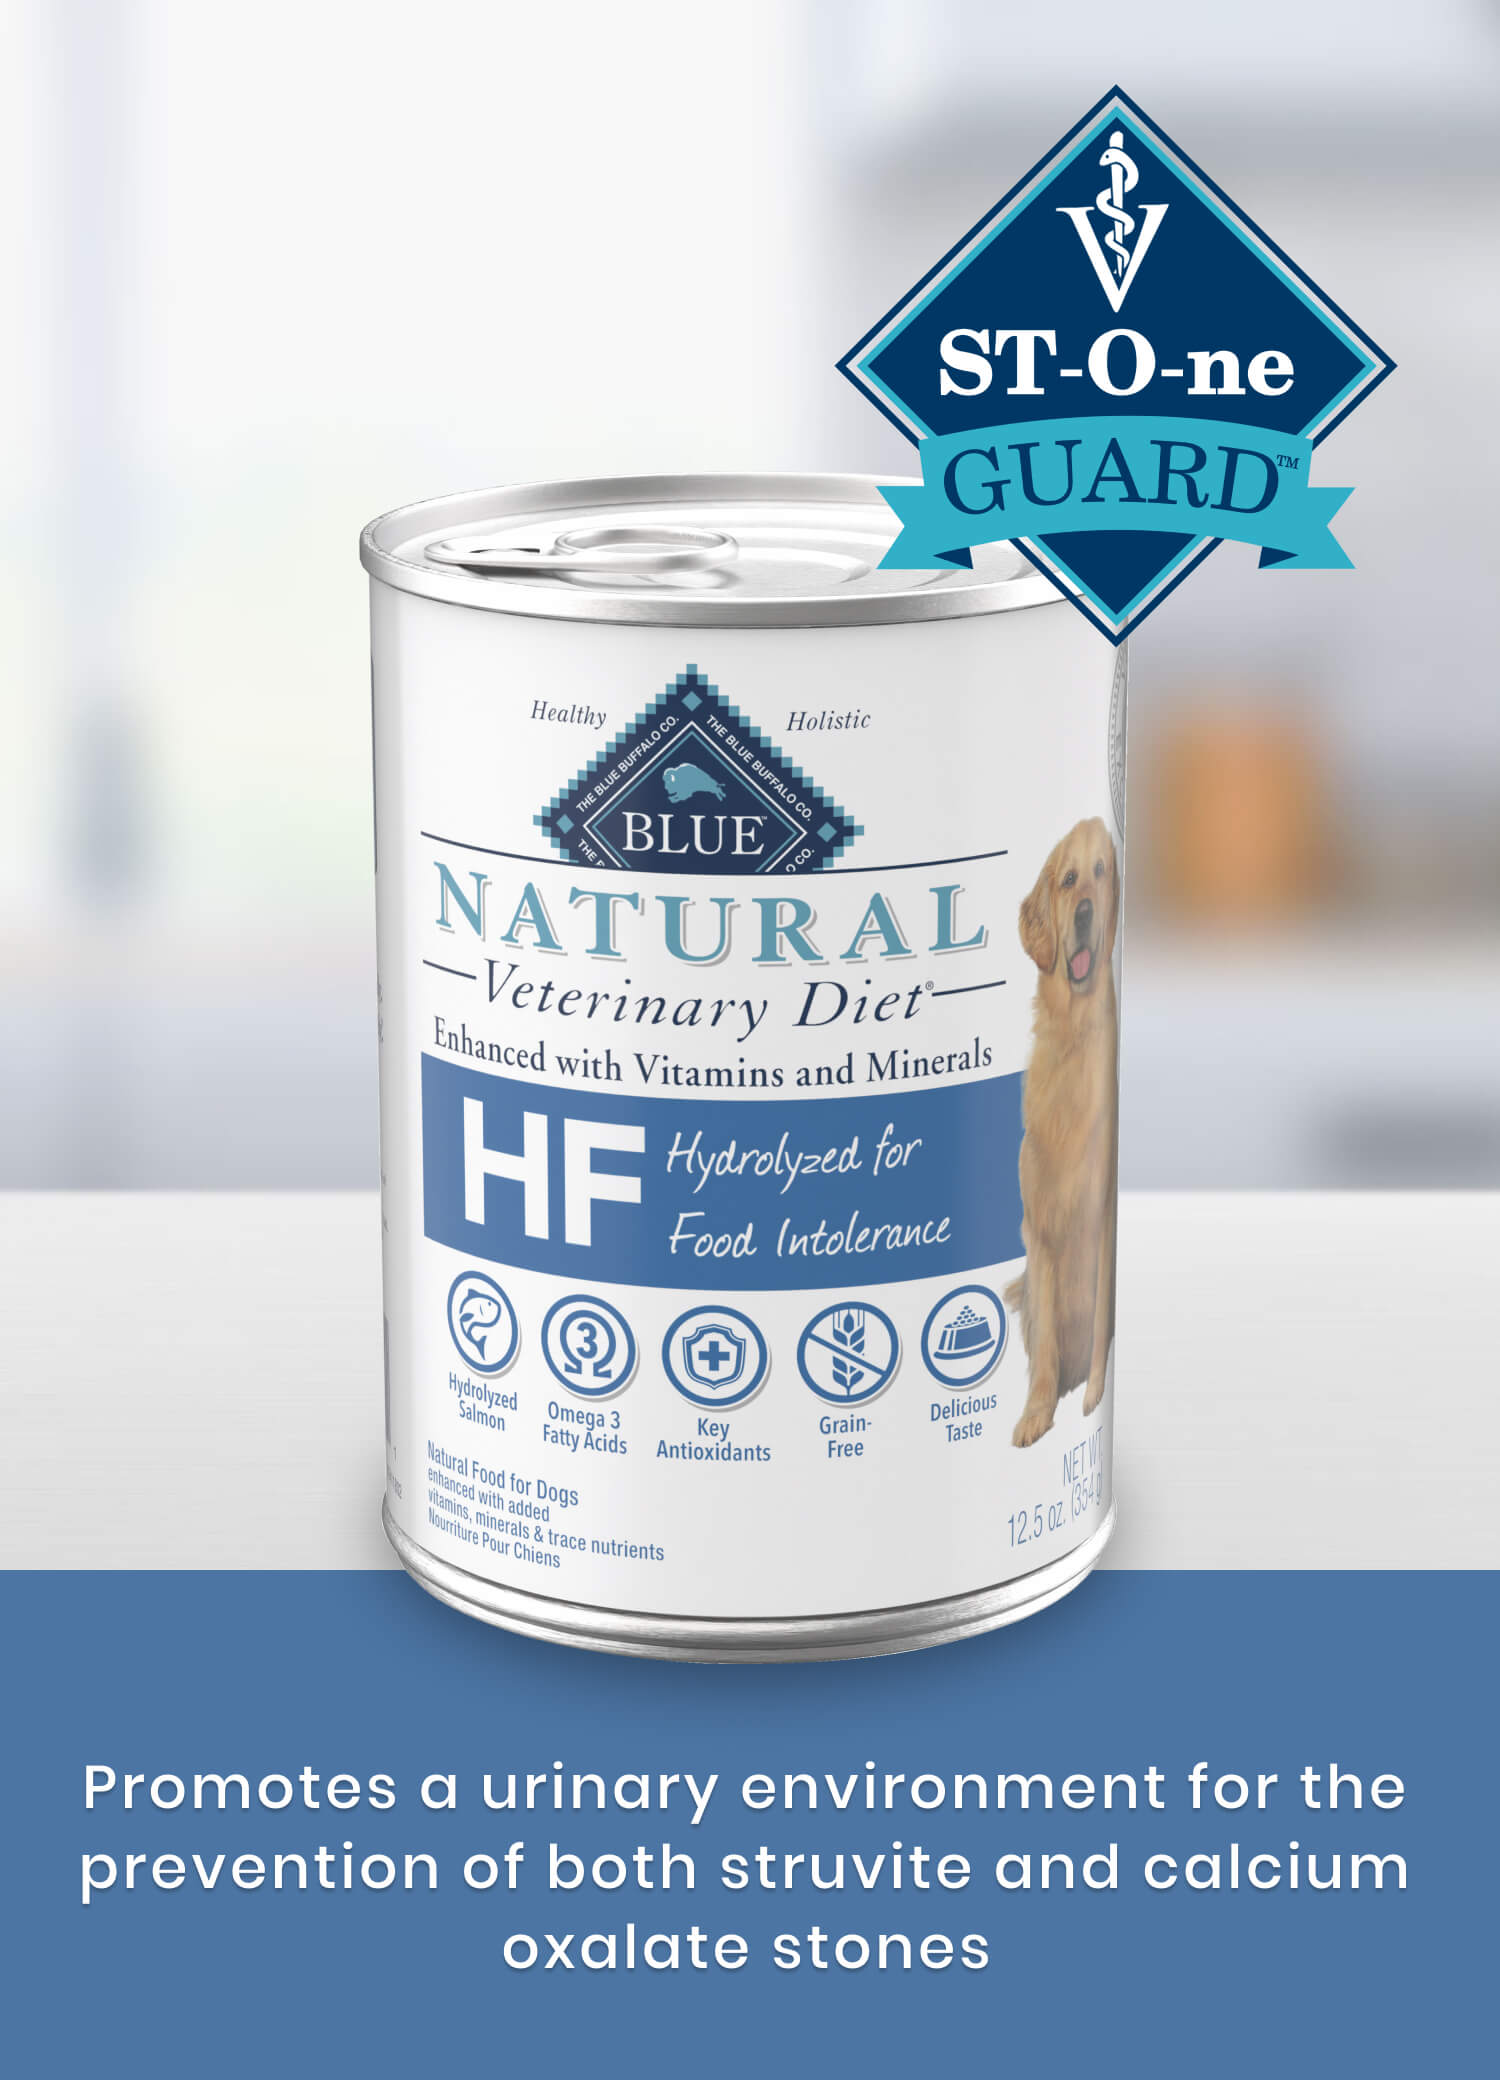 HF Hydrolyzed for Food Intolerance St-O-ne Guard Promotes a urinary environment for the prevention of both struvite and calcium oxalate stones